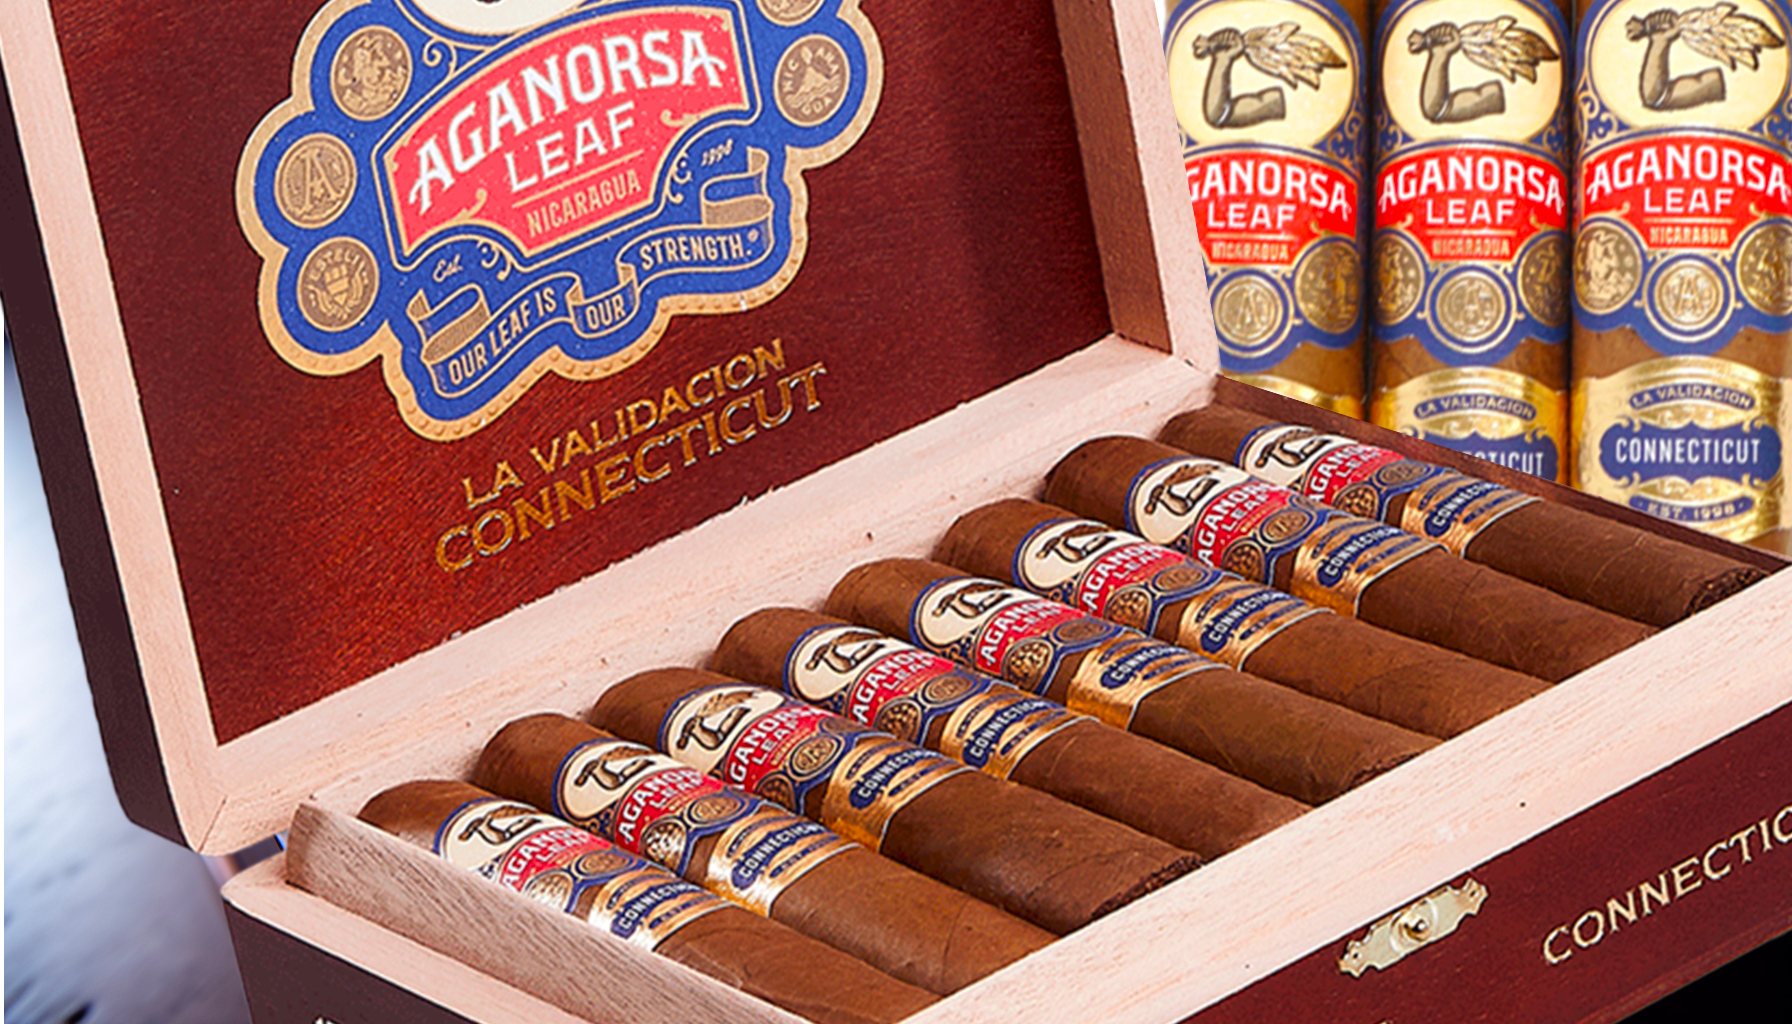 Selecting the perfect Aganorsa Leaf Validacion Connecticut cigar for your humidor